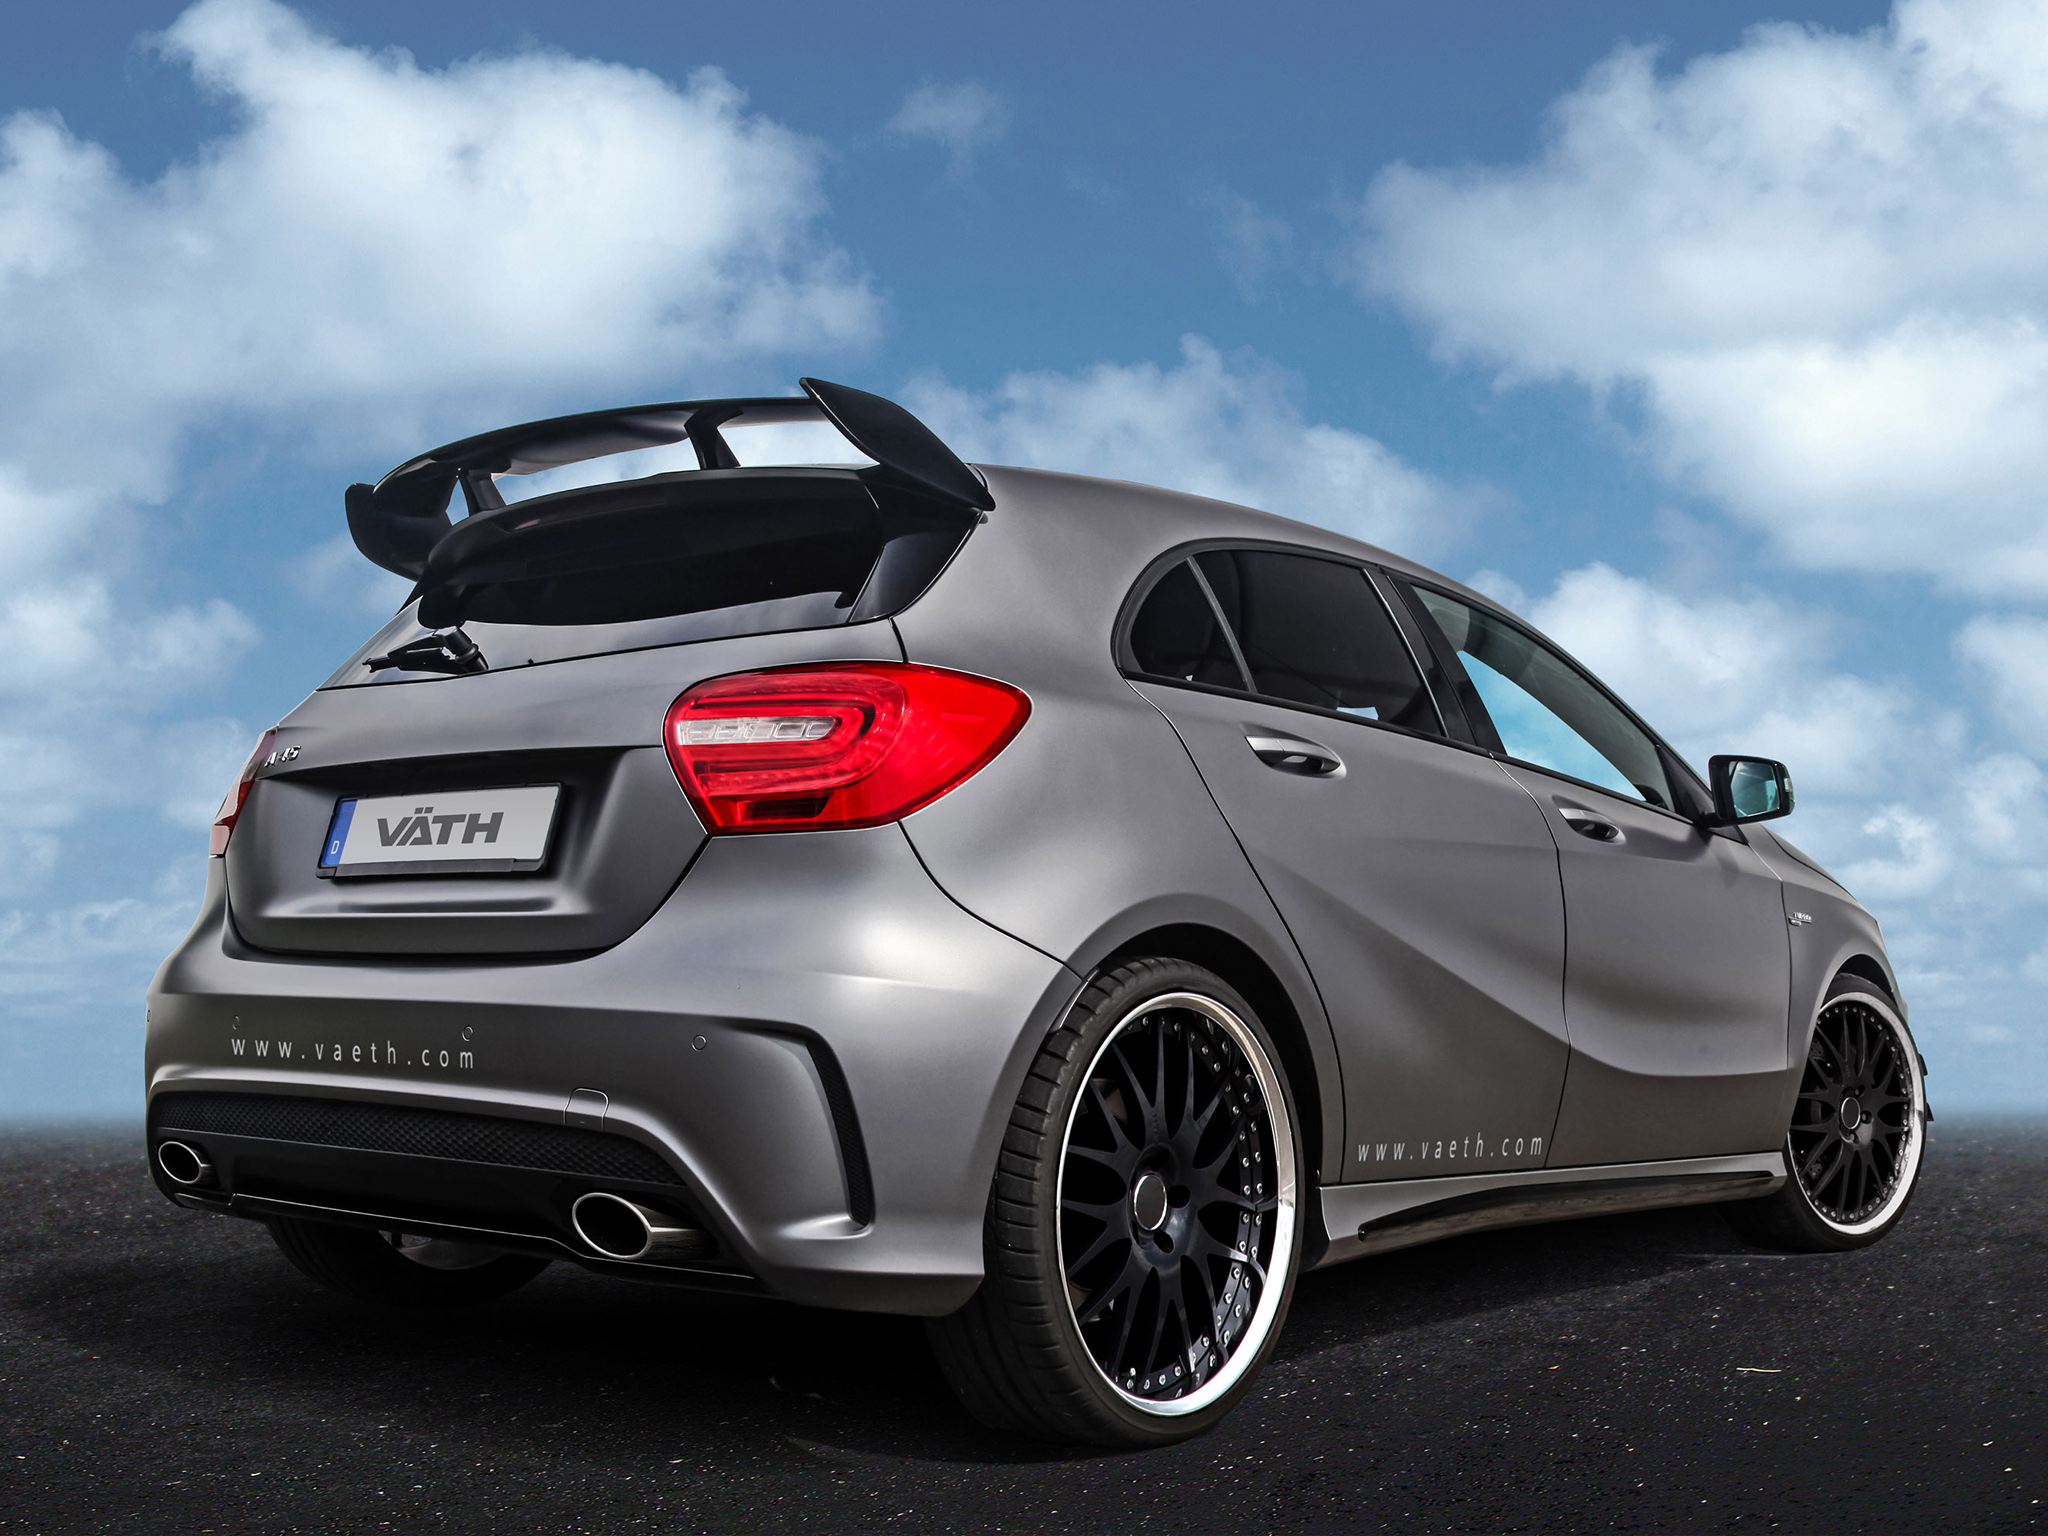 Mercedes Benz A 45 AMG Tuned by VATH to 425 HP autoevolution